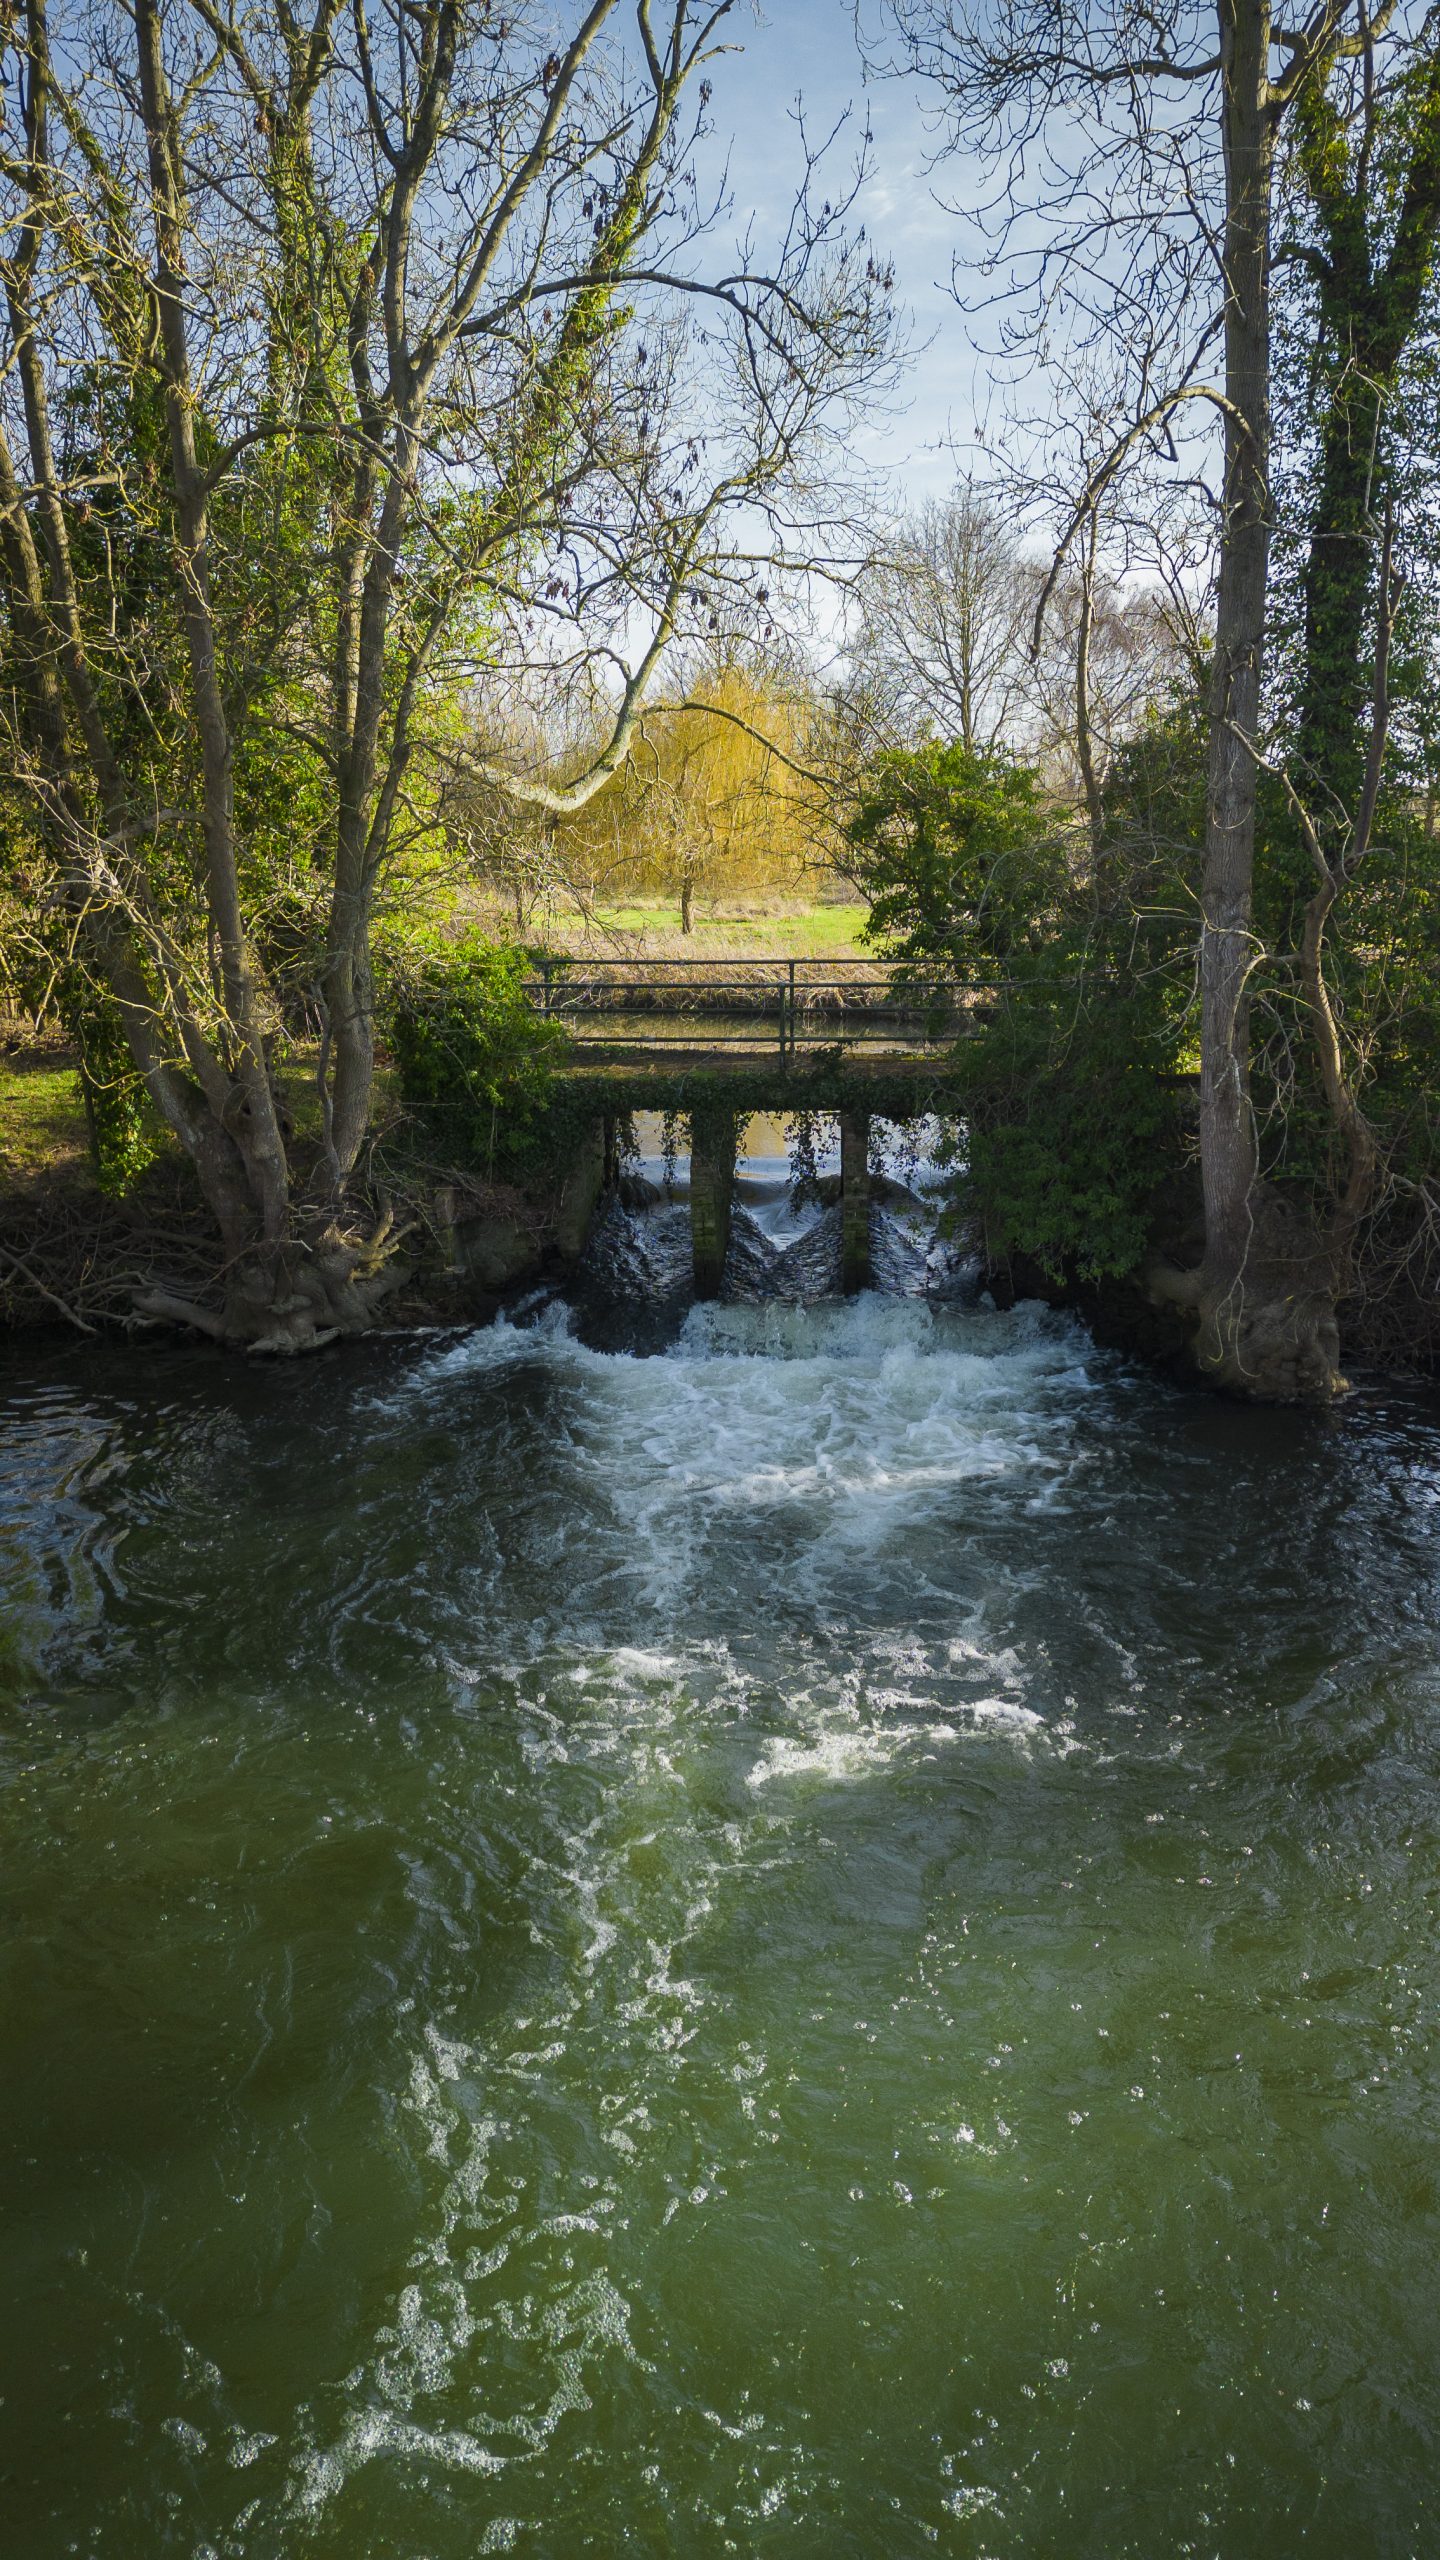 Dorchester fish passage and Bucks pool weir solution Public Consultation